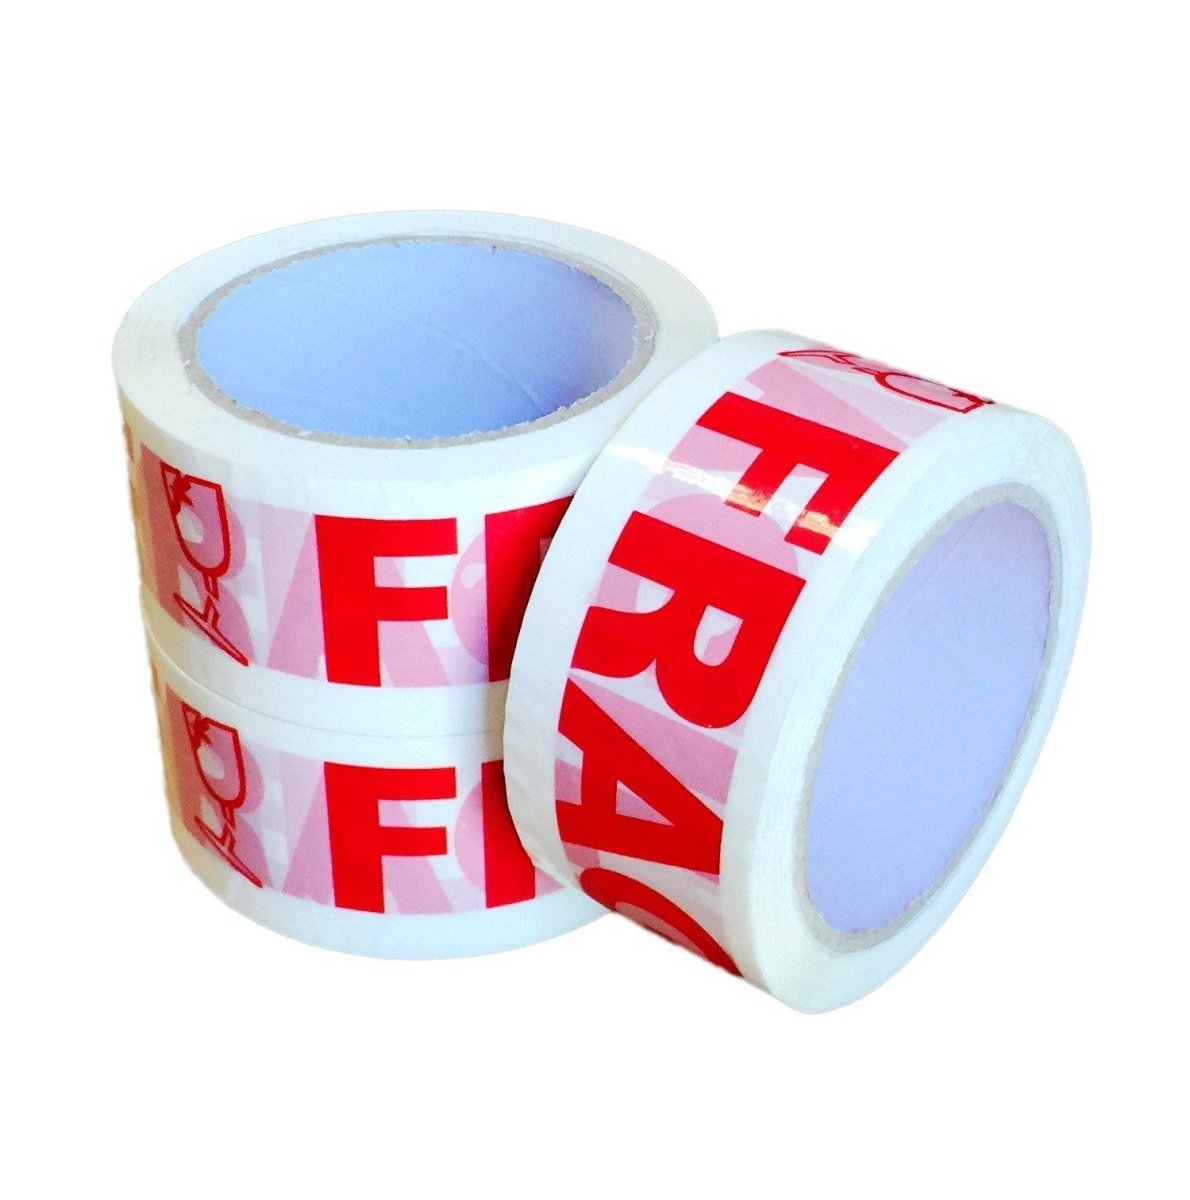 Fragile Packing Tape White Red 48mm x 75meter